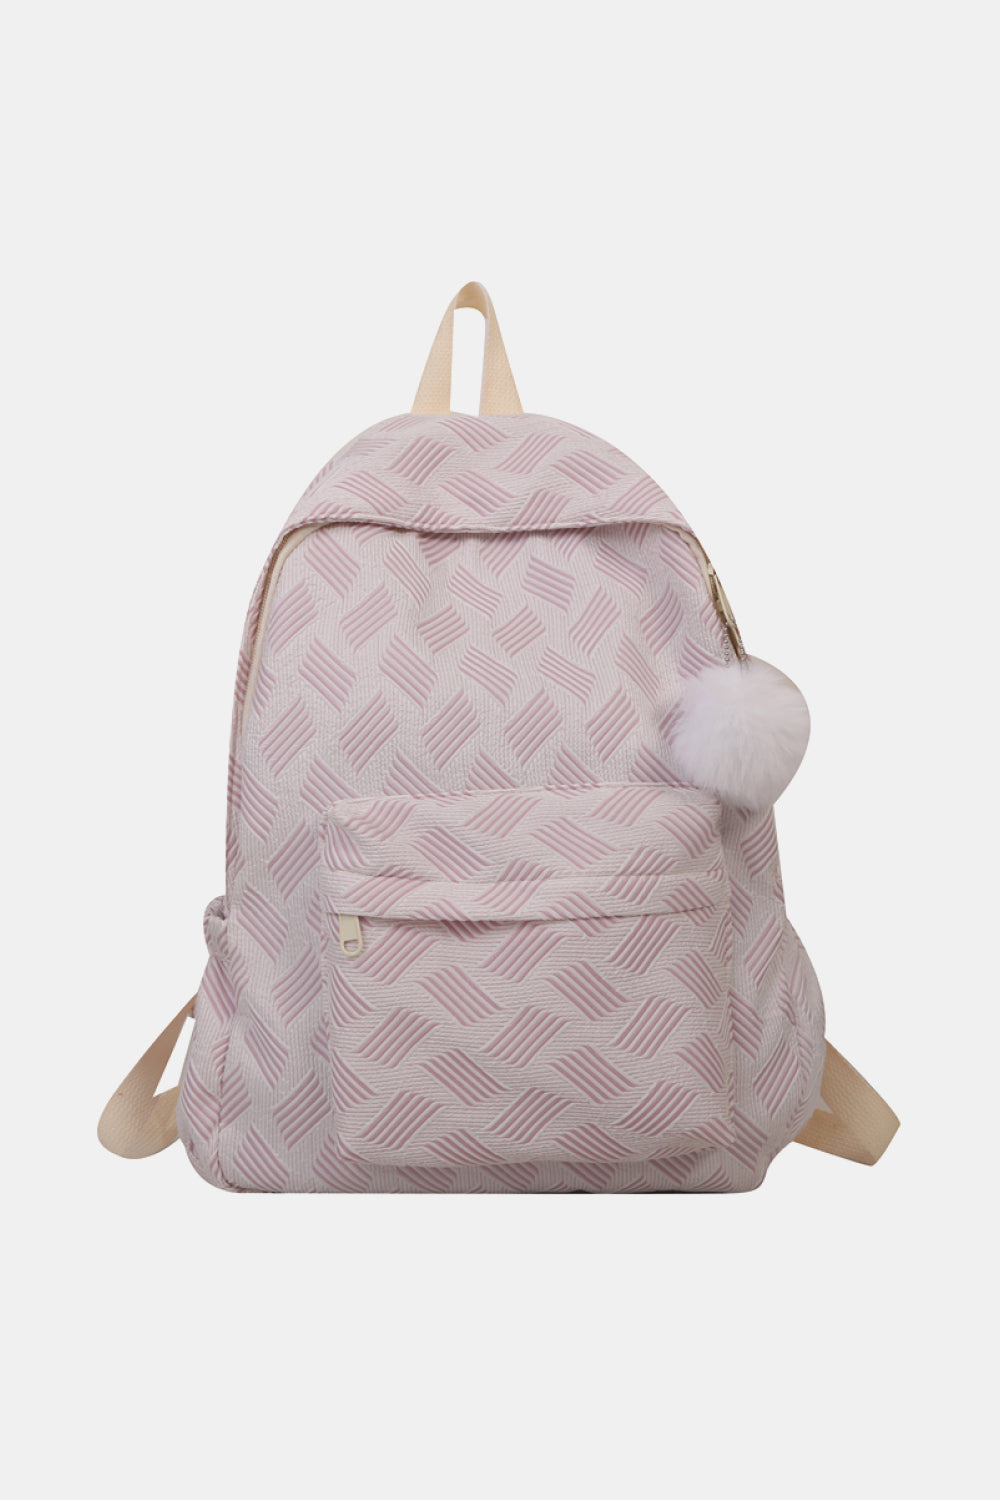 Printed Polyester Large Backpack - AllIn Computer